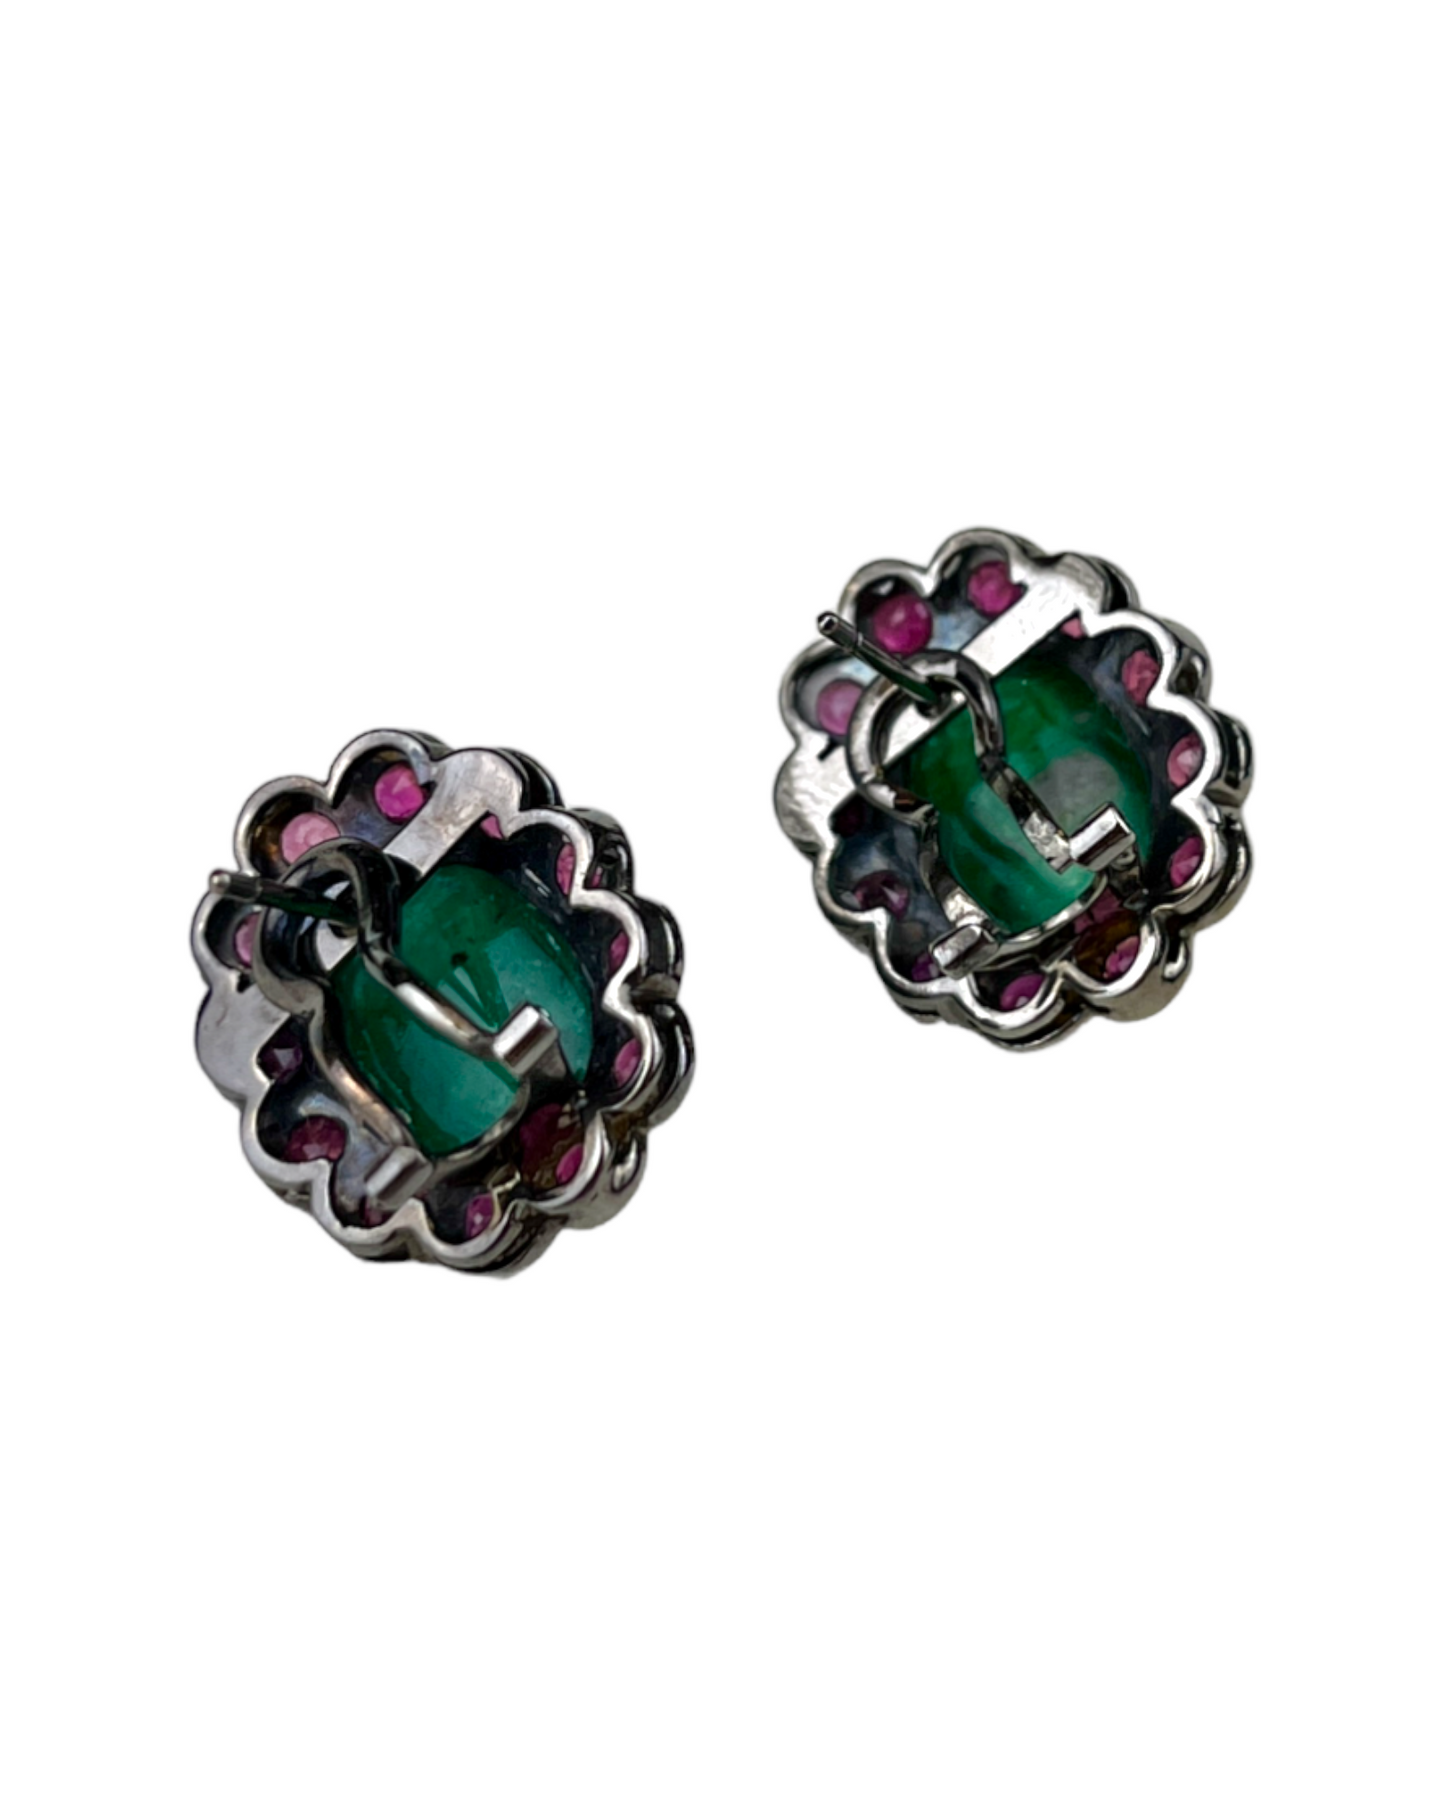 Namazte Maharaja Earrings with Emerald and Ruby